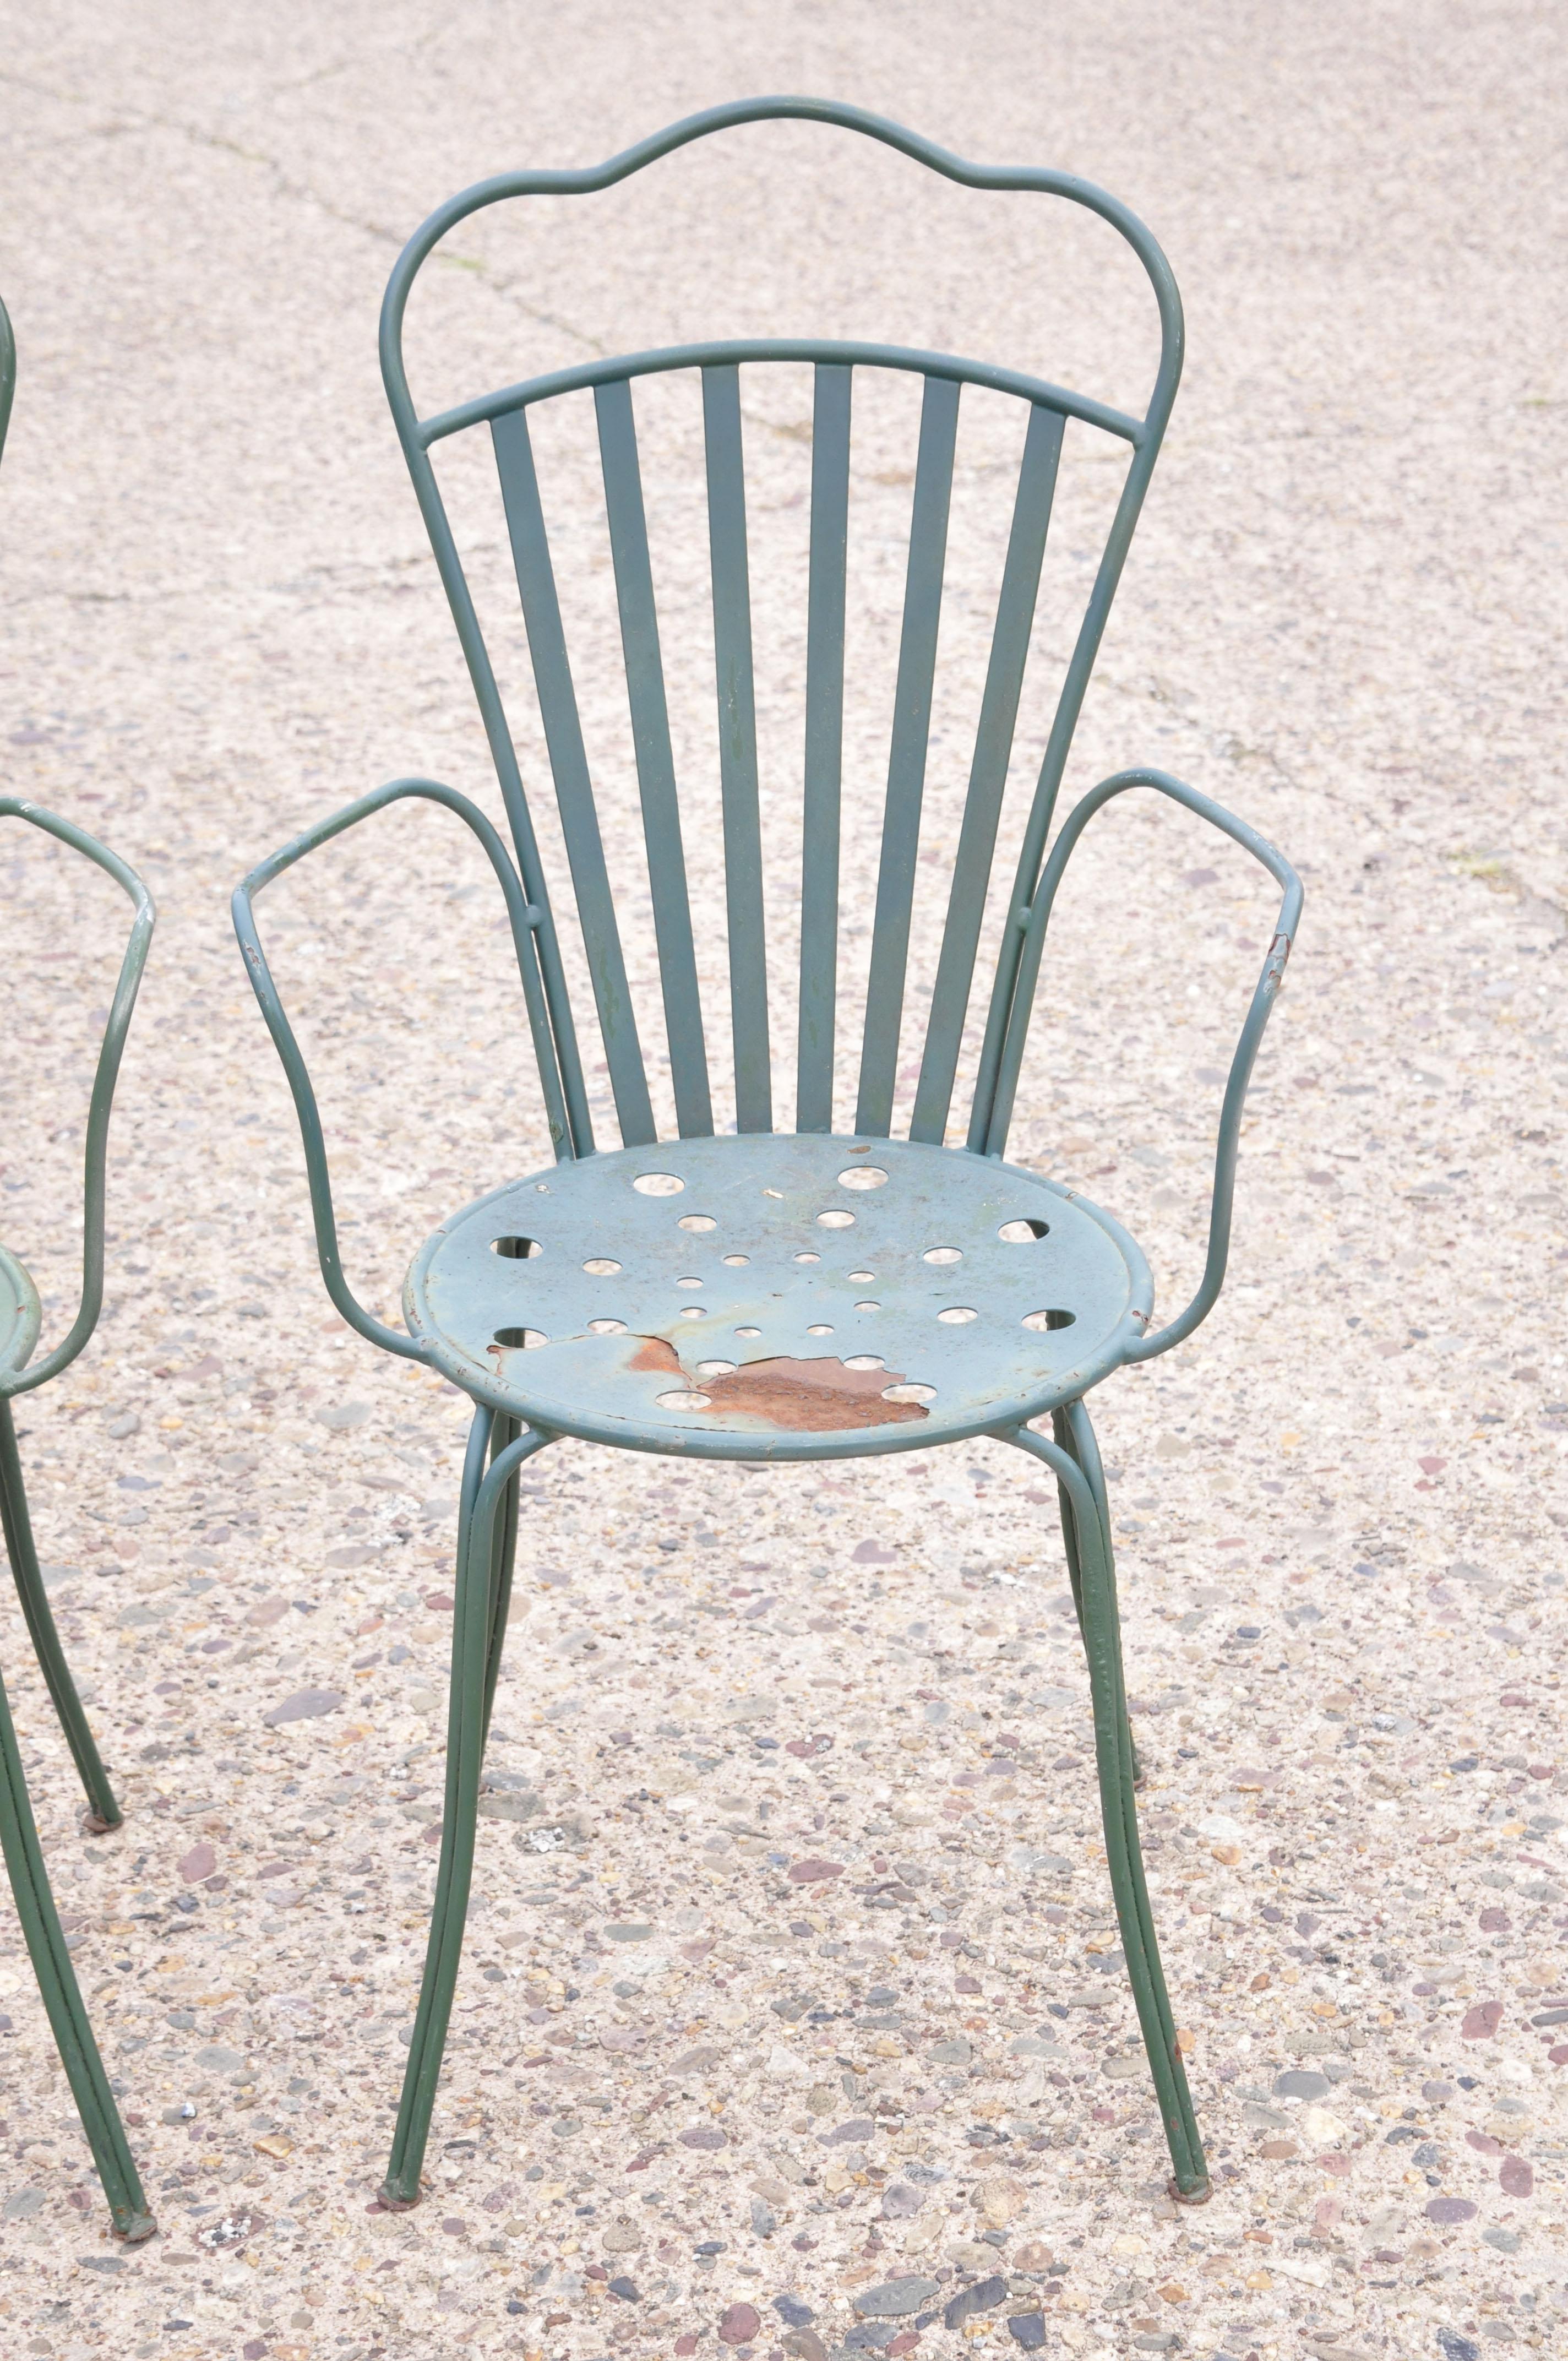 North American Vintage Mid Century Wrought Iron Fan Back Garden Patio Dining Chairs, Set of 4